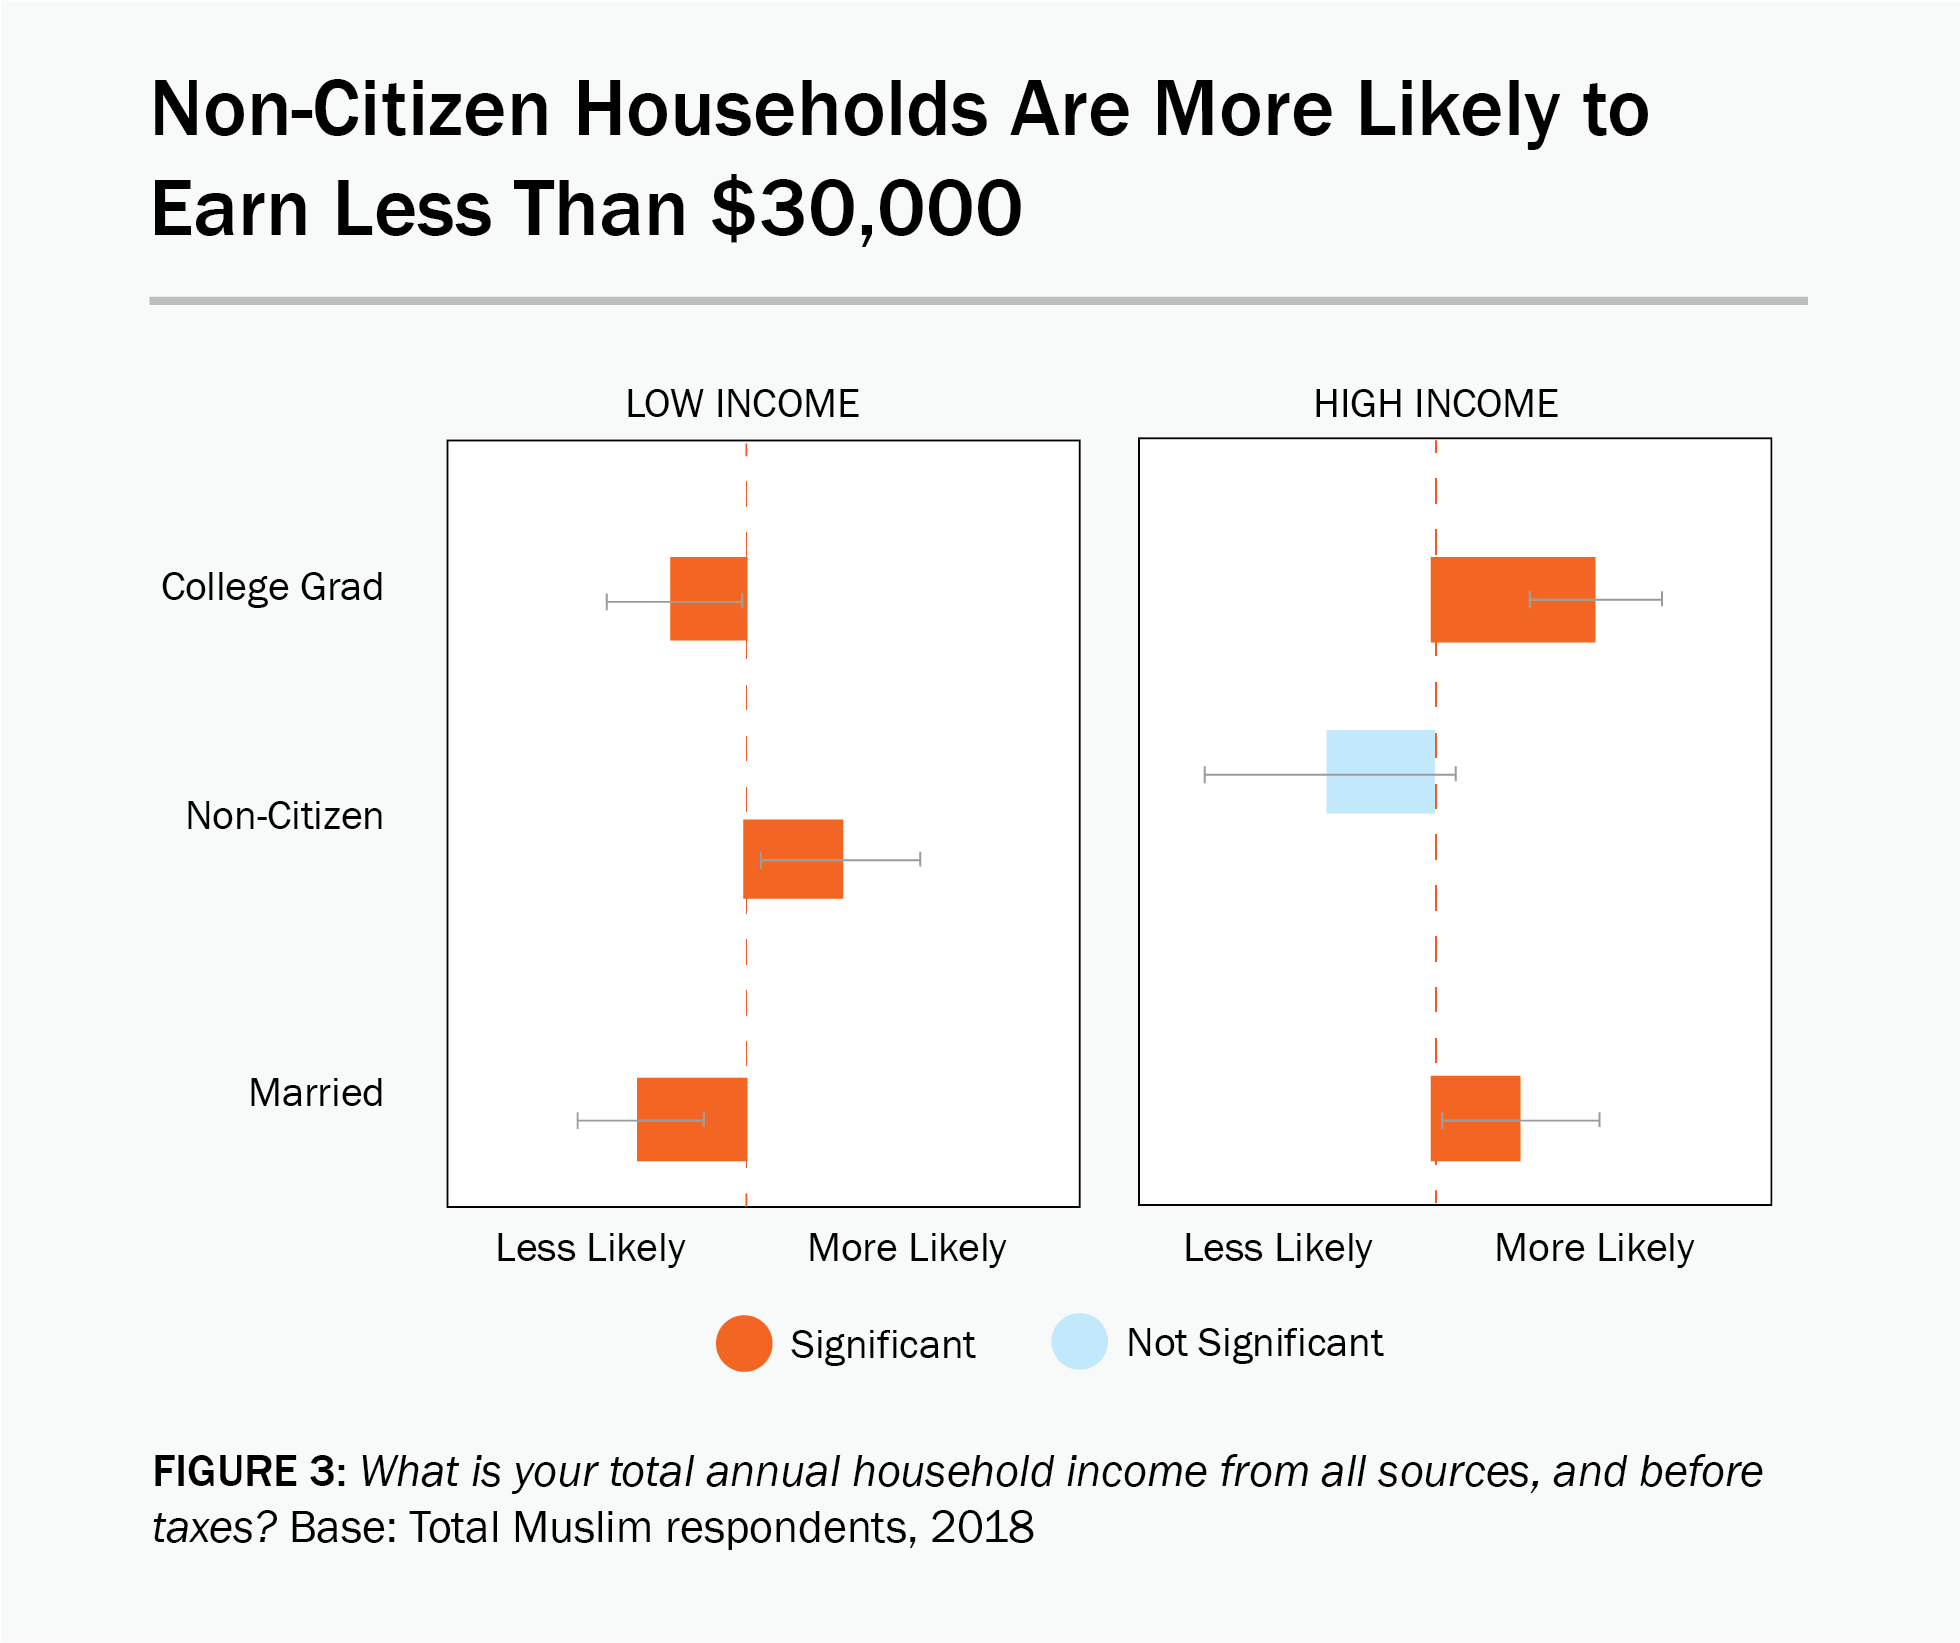 Figure 2: A data chart showing that non-citizen households are more likely to earn less than $30,000